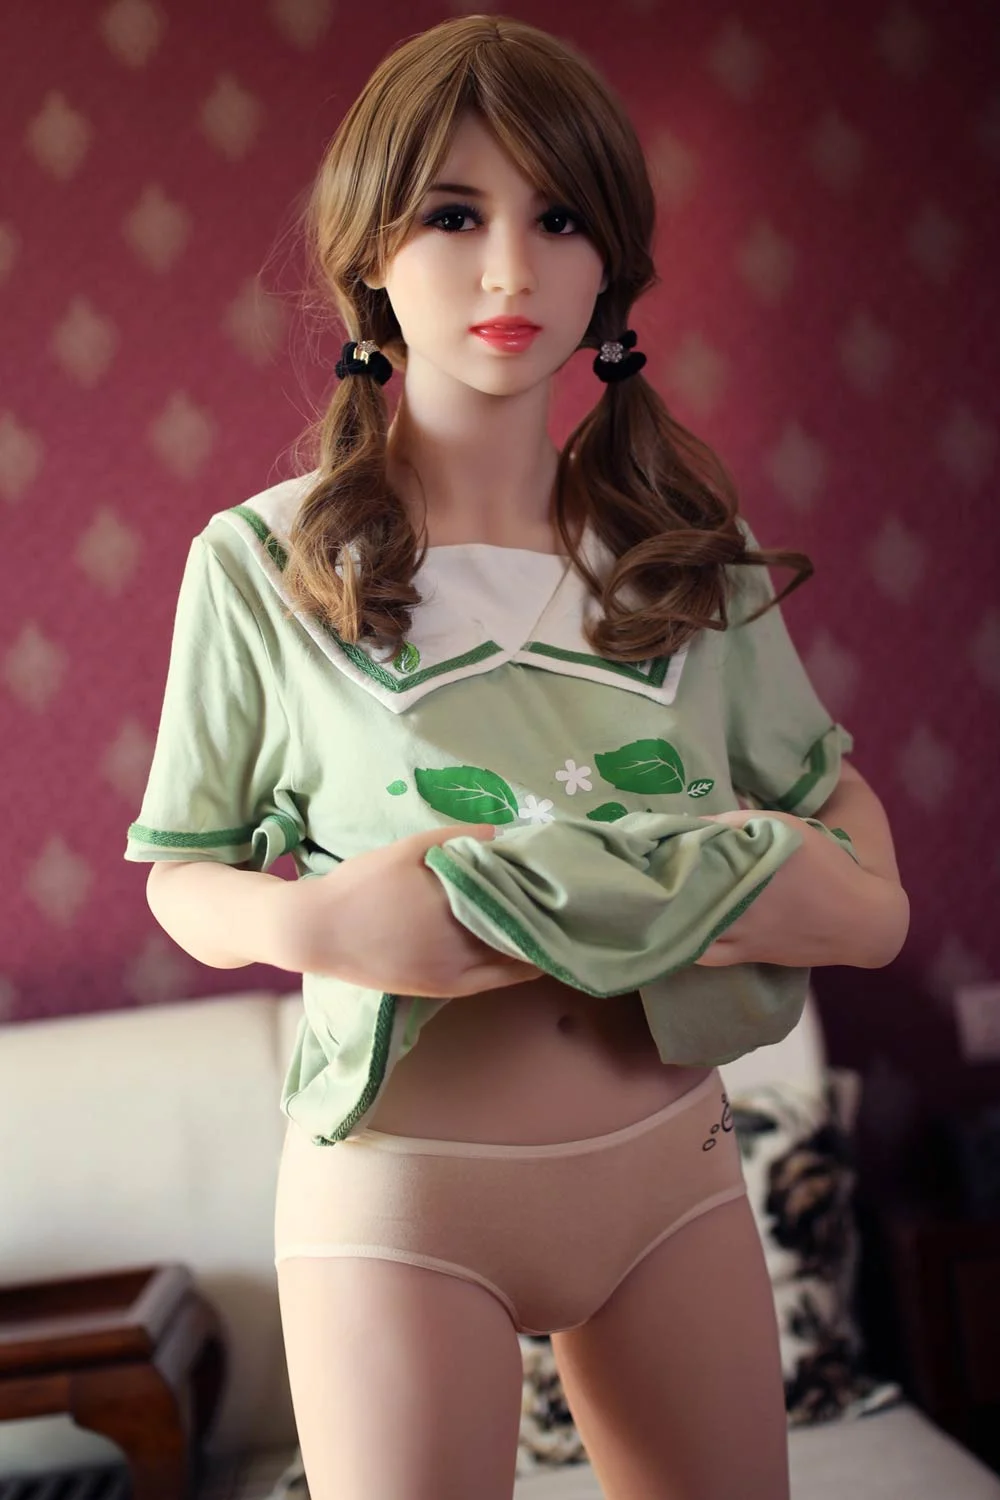 Sex doll with hands in clothes